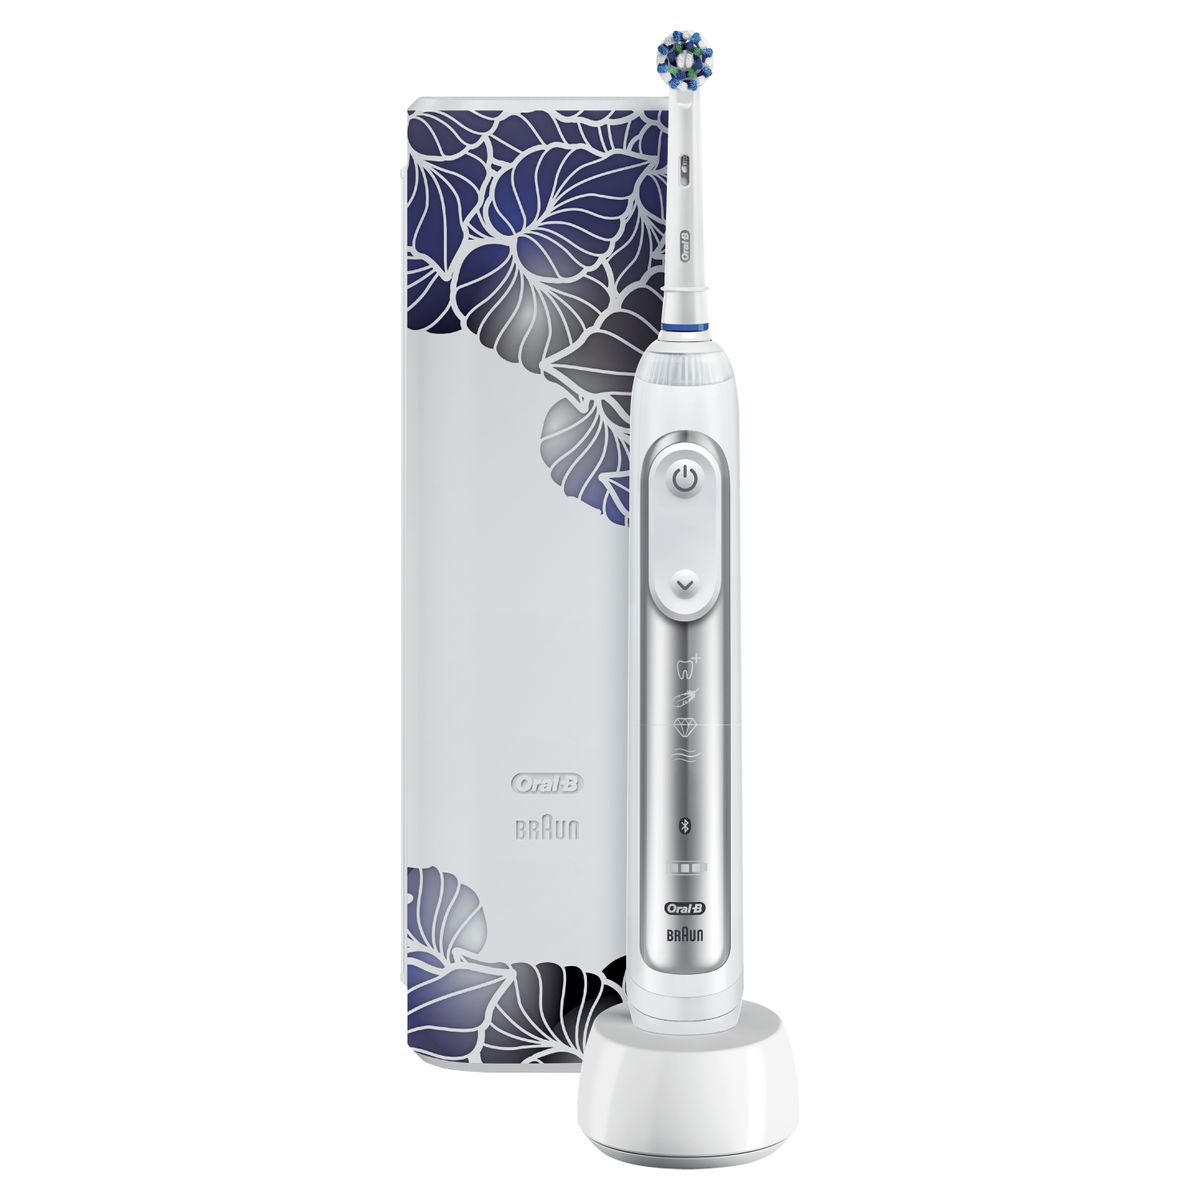 Oral-B Genius 8500 Electric Toothbrush/Electric Toothbrush, 6 Brushing Modes for Dental Care & Bluetooth App, Design Edition with Travel Case, Gift for Her/Him, Silver Case Purple